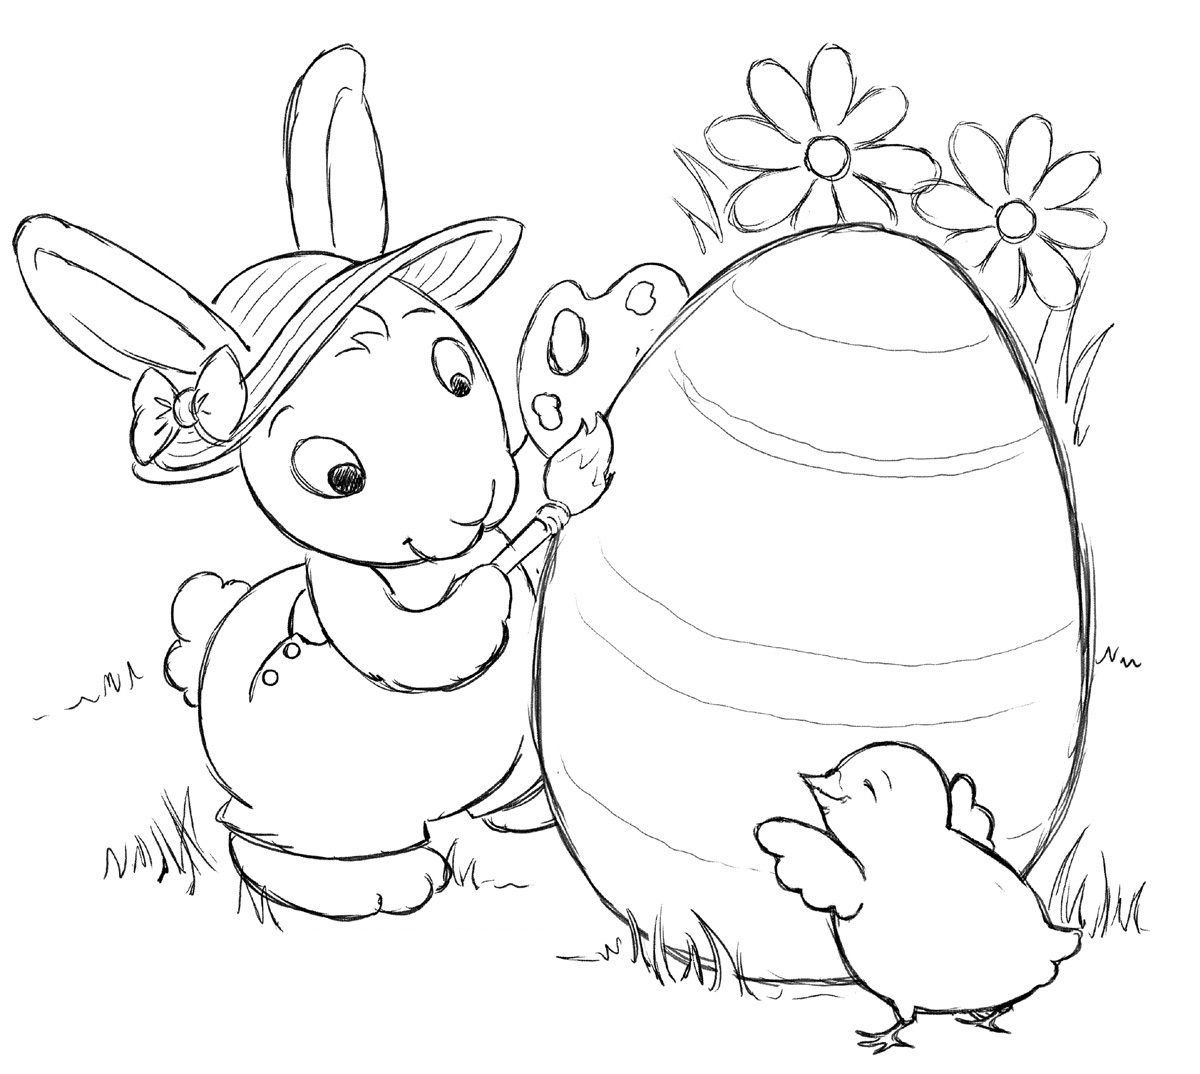 Eggceptional Easter Bunny coloring page